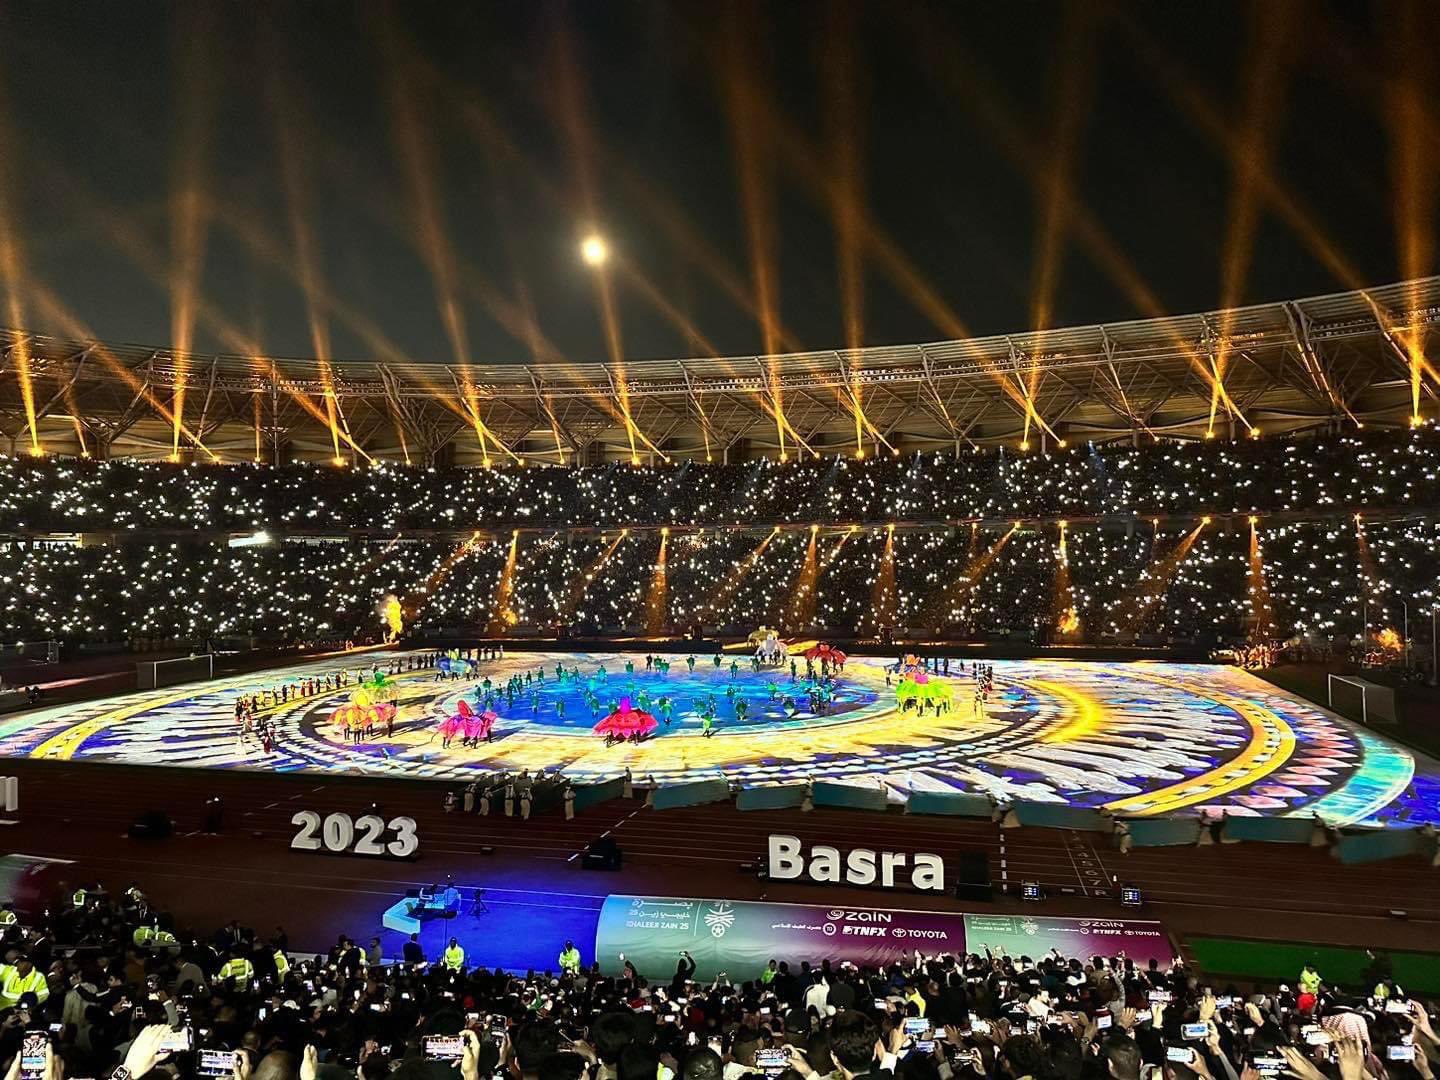 Over 30,000 fans entered Iraq to attend 25th Gulf Cup